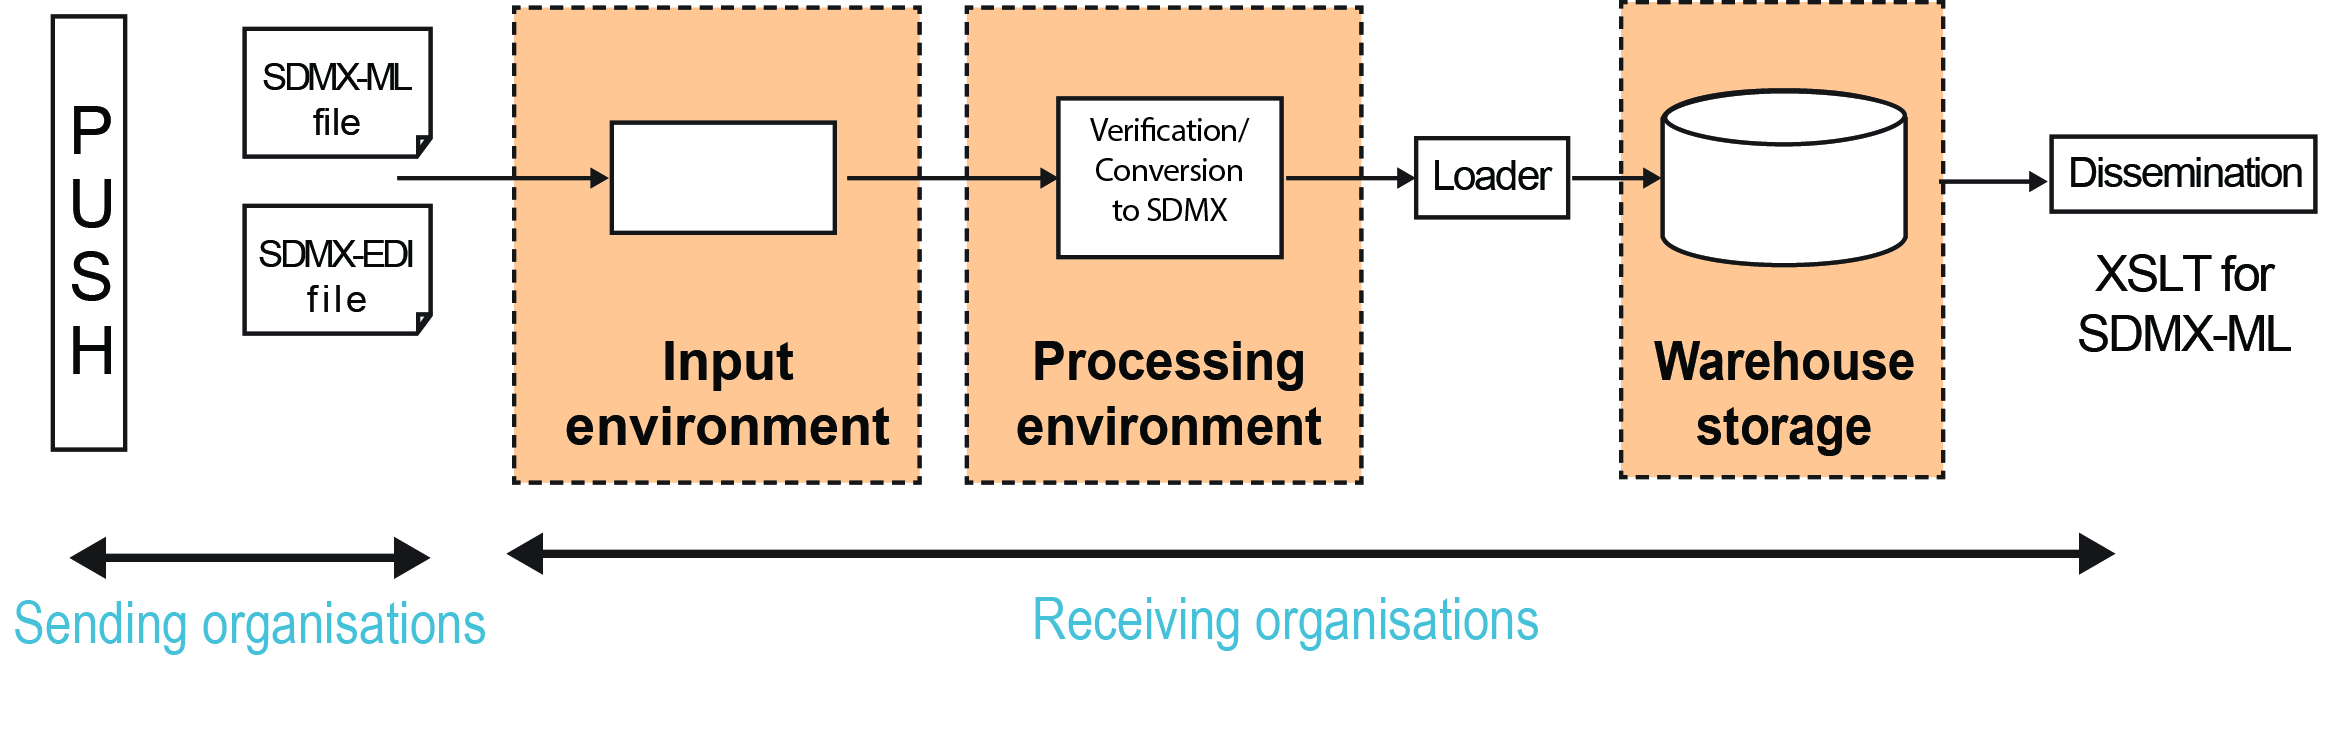 This flow diagram shows that in the push architecture, sending organisations create and send their SDMX-compliant files to receiving organisations. Receiving organisations validate and process the incoming data, then load them in their production databases, and finally disseminate the data.